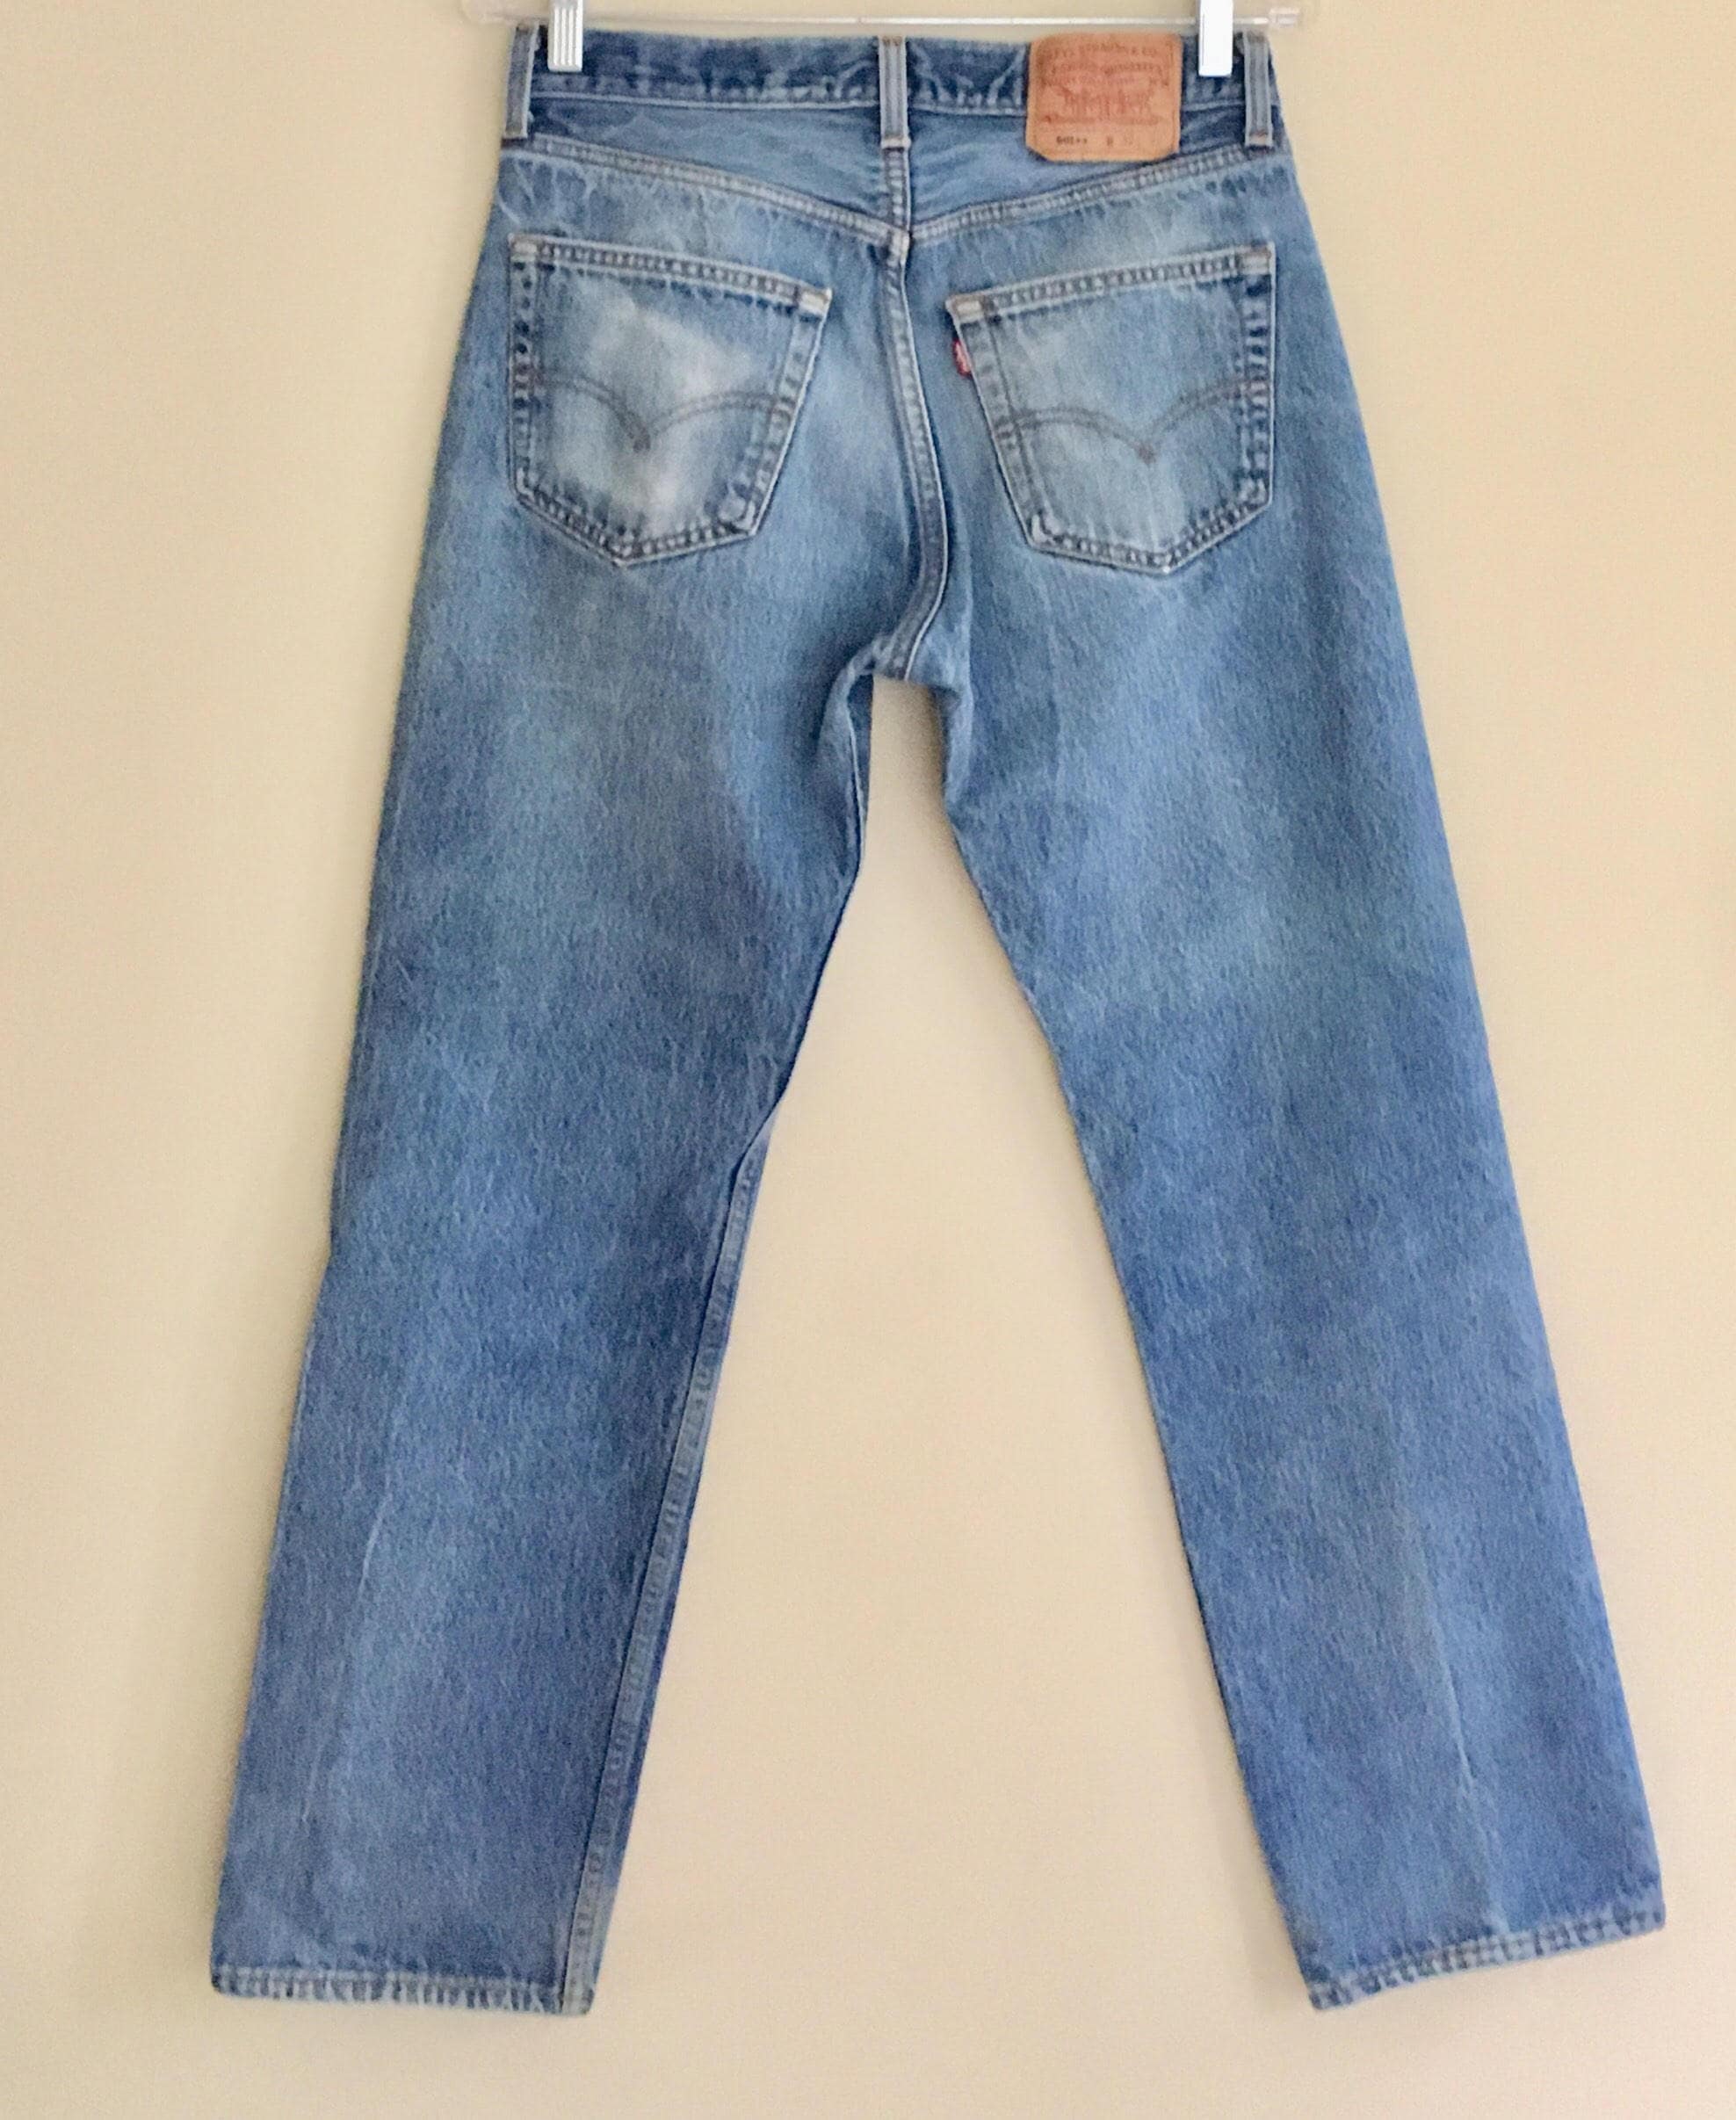 Vintage Levi's 501 Red Tab Men's Denim Jeans 501xx with Button Fly ...